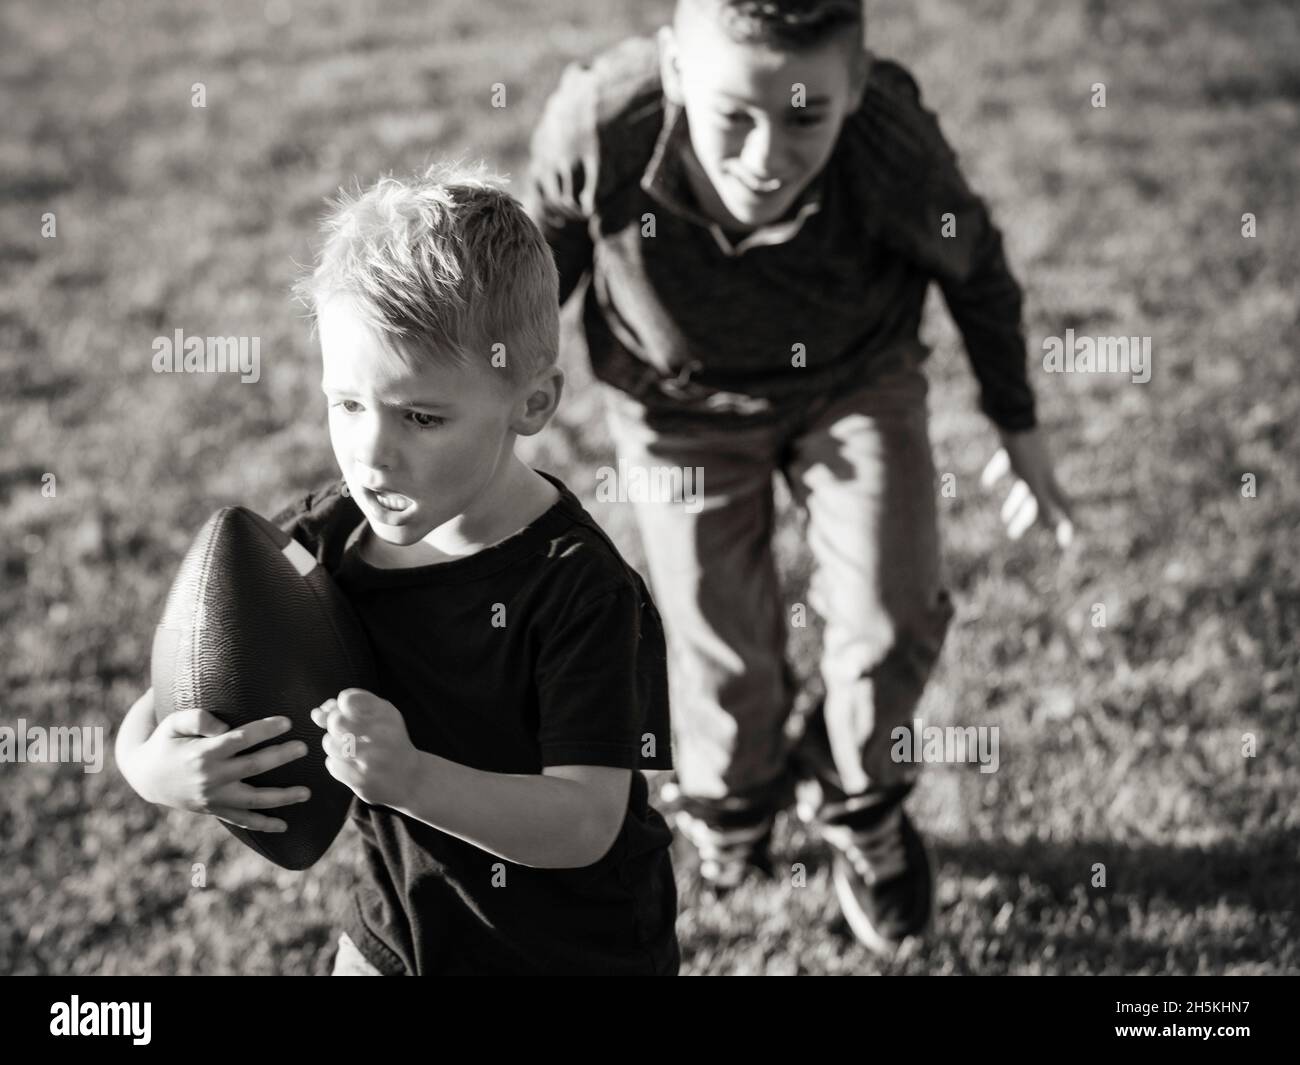 Two brothers running on the grass with a football; St. Albert, Alberta, Canada Stock Photo